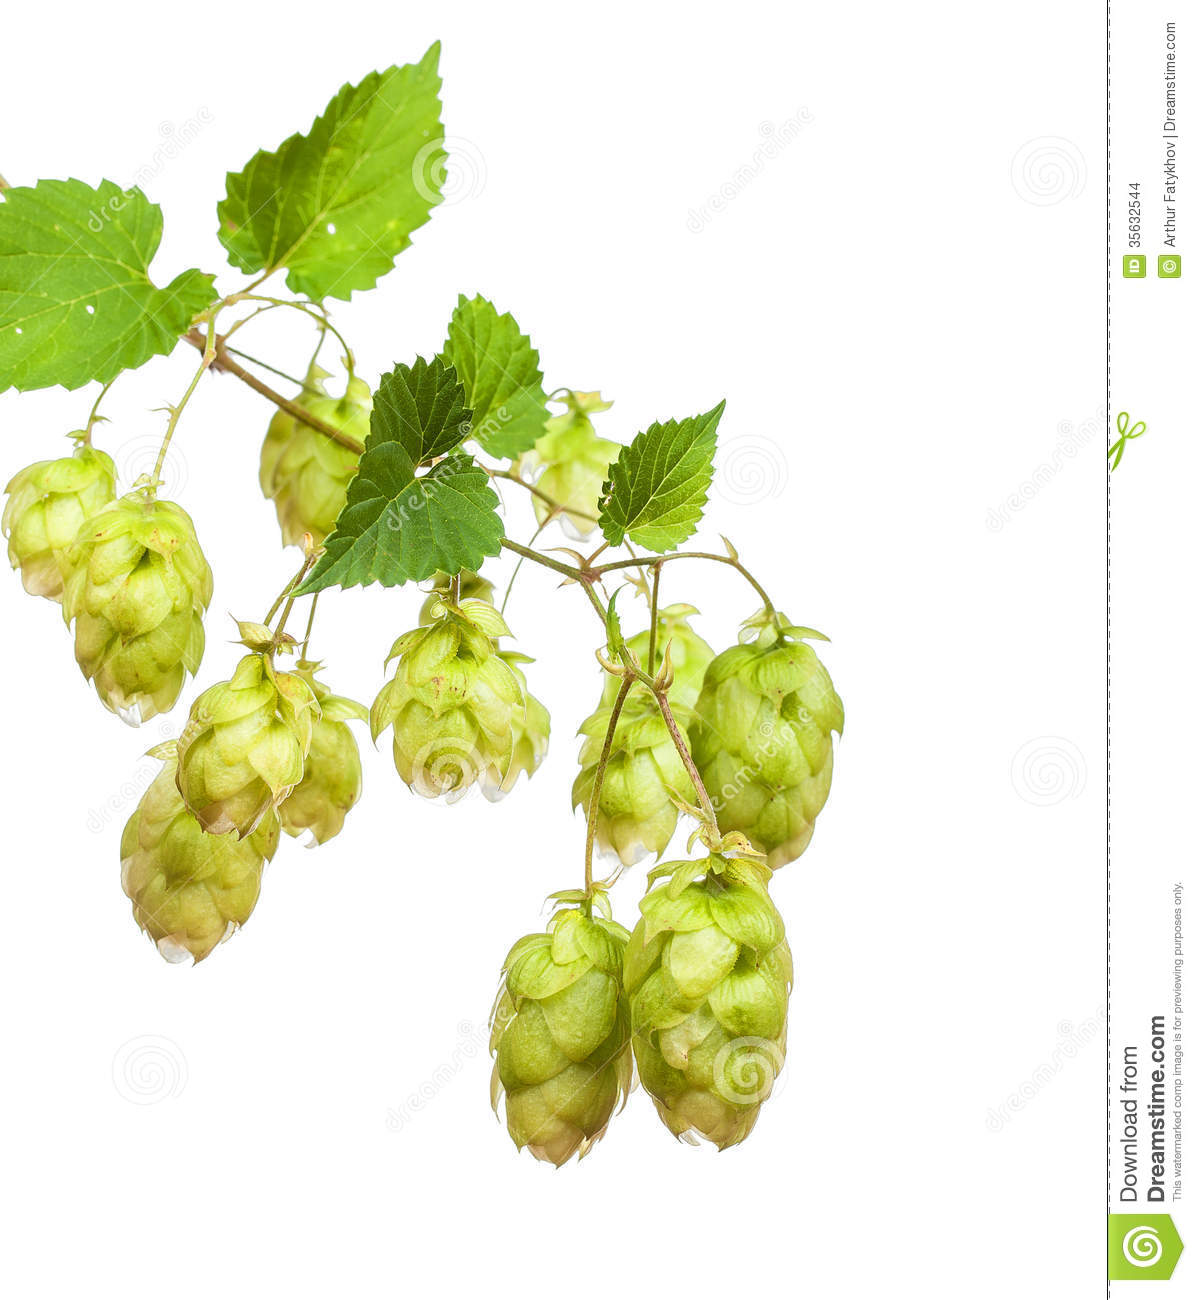 Hop Cones Stock Images   Image  35632544